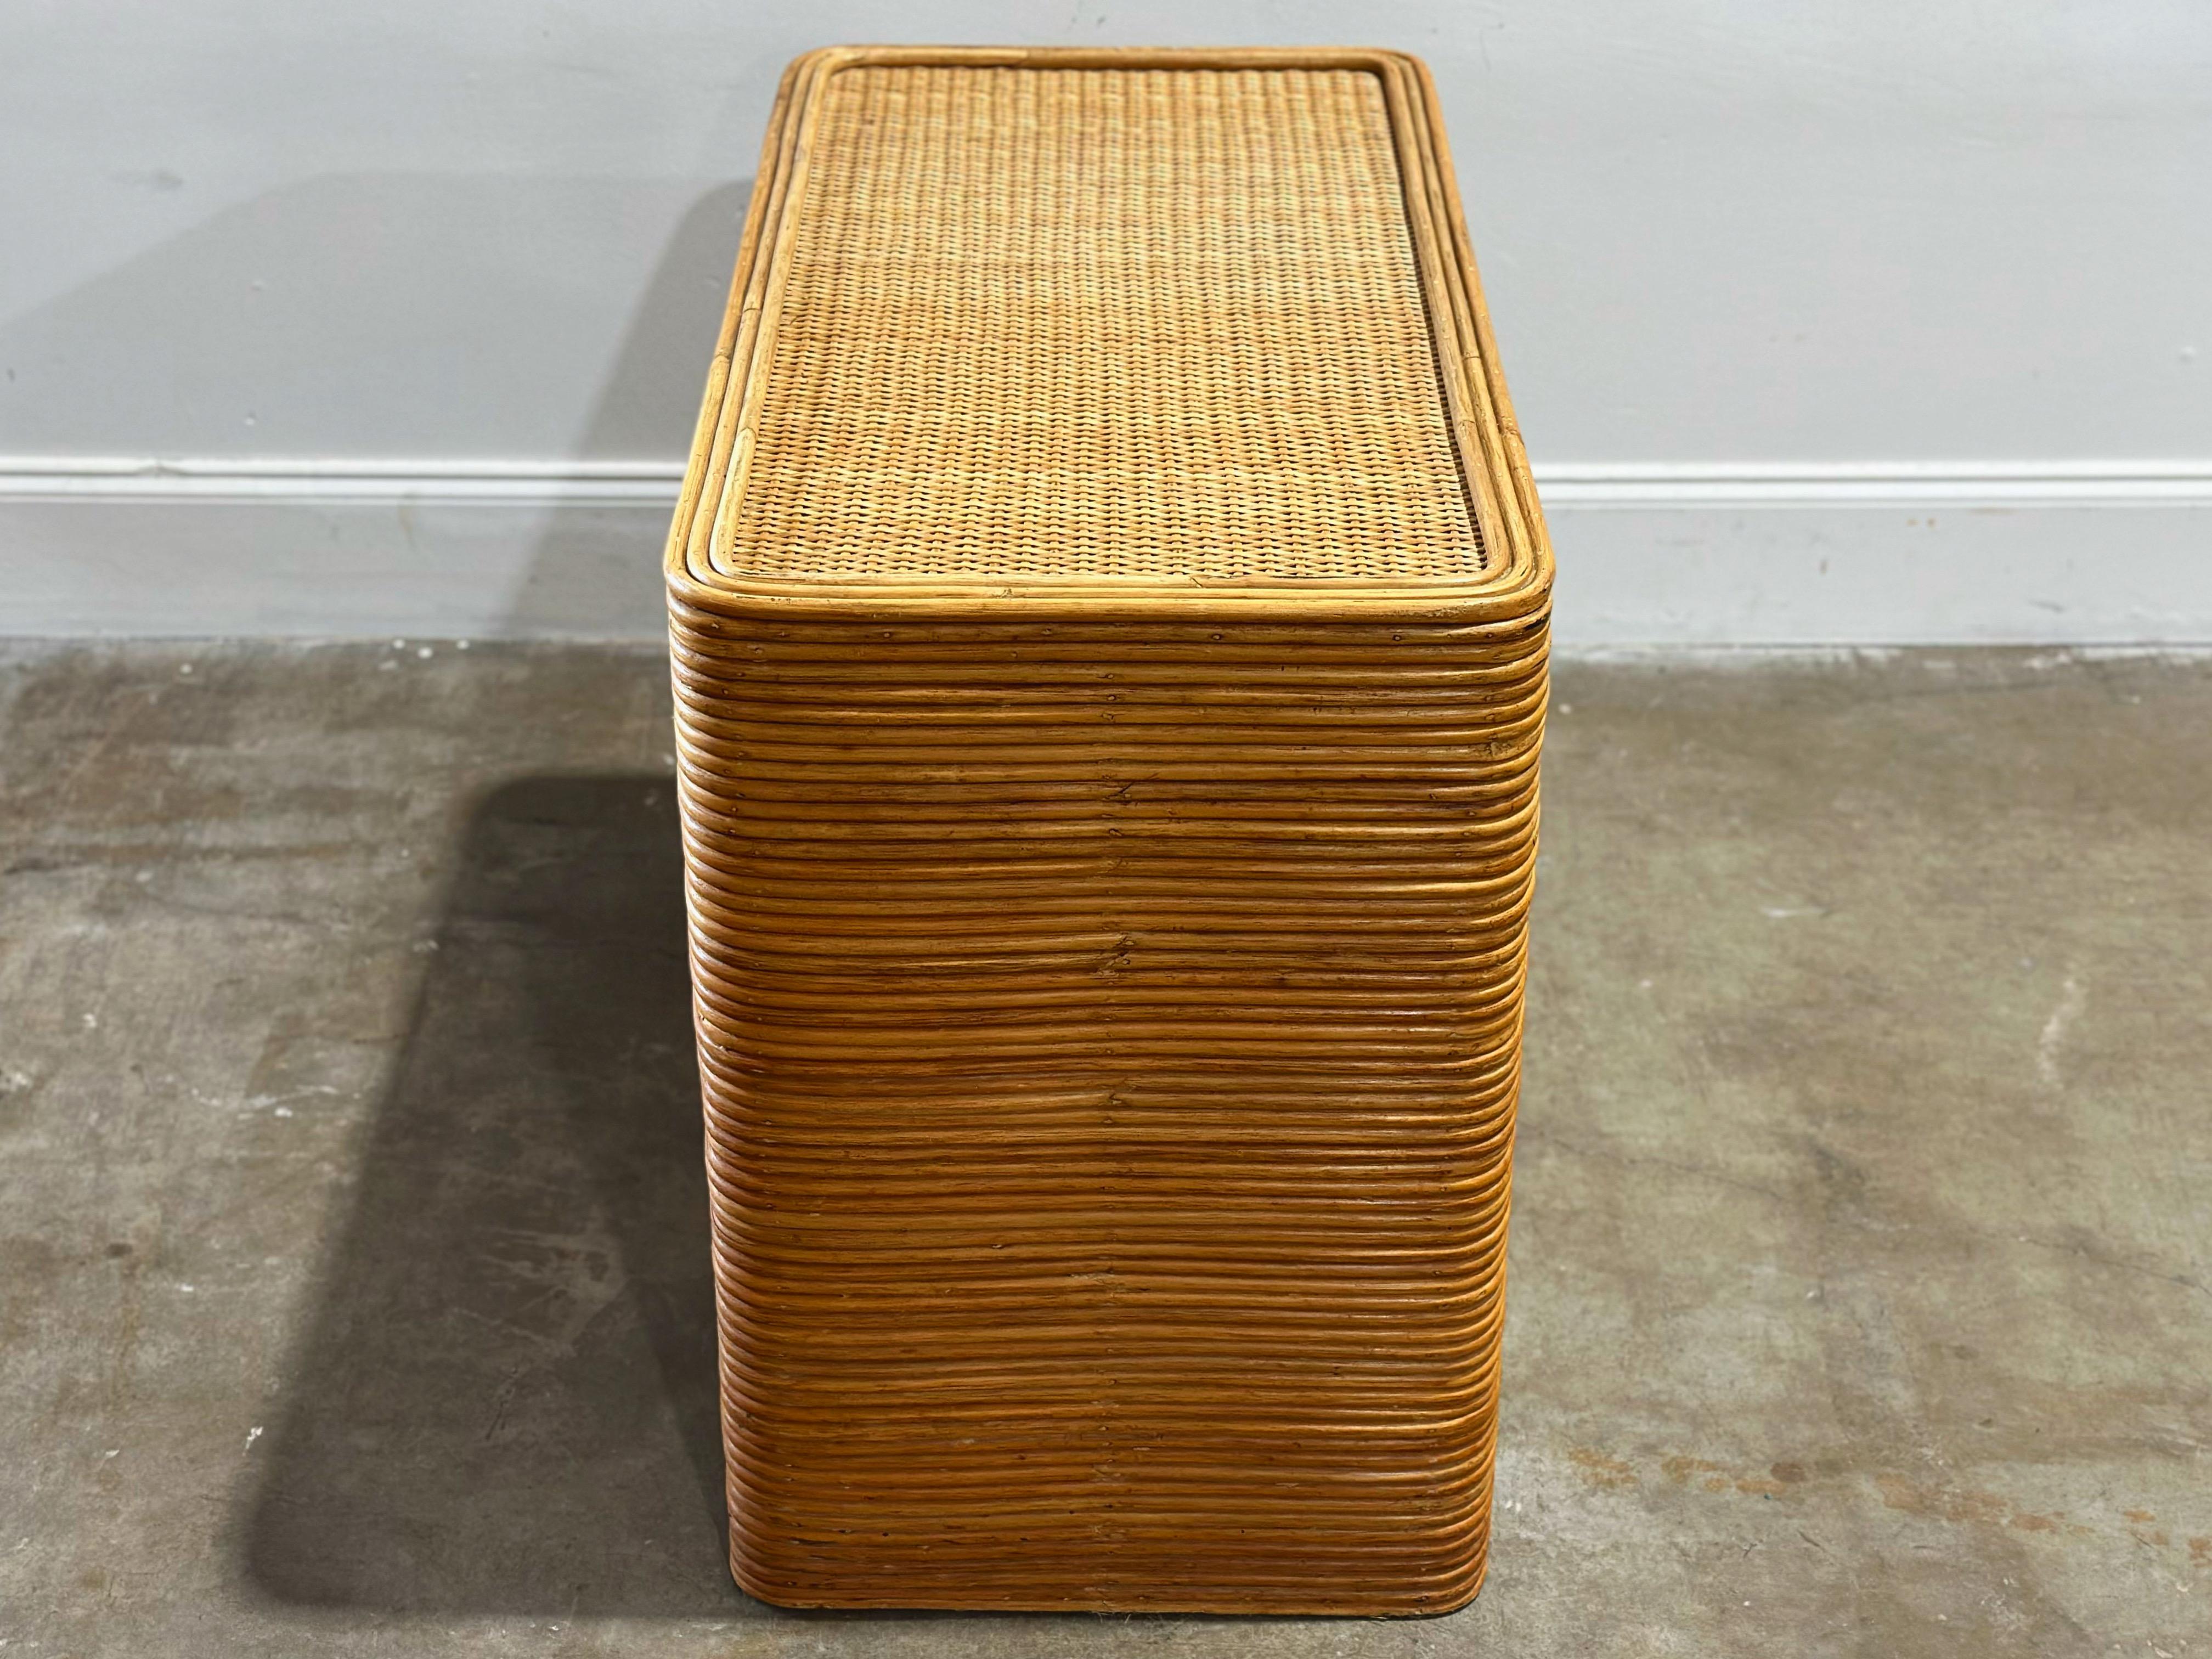 Vintage French Rattan Console Table - Stacked Reed - Organic Modern For Sale 4